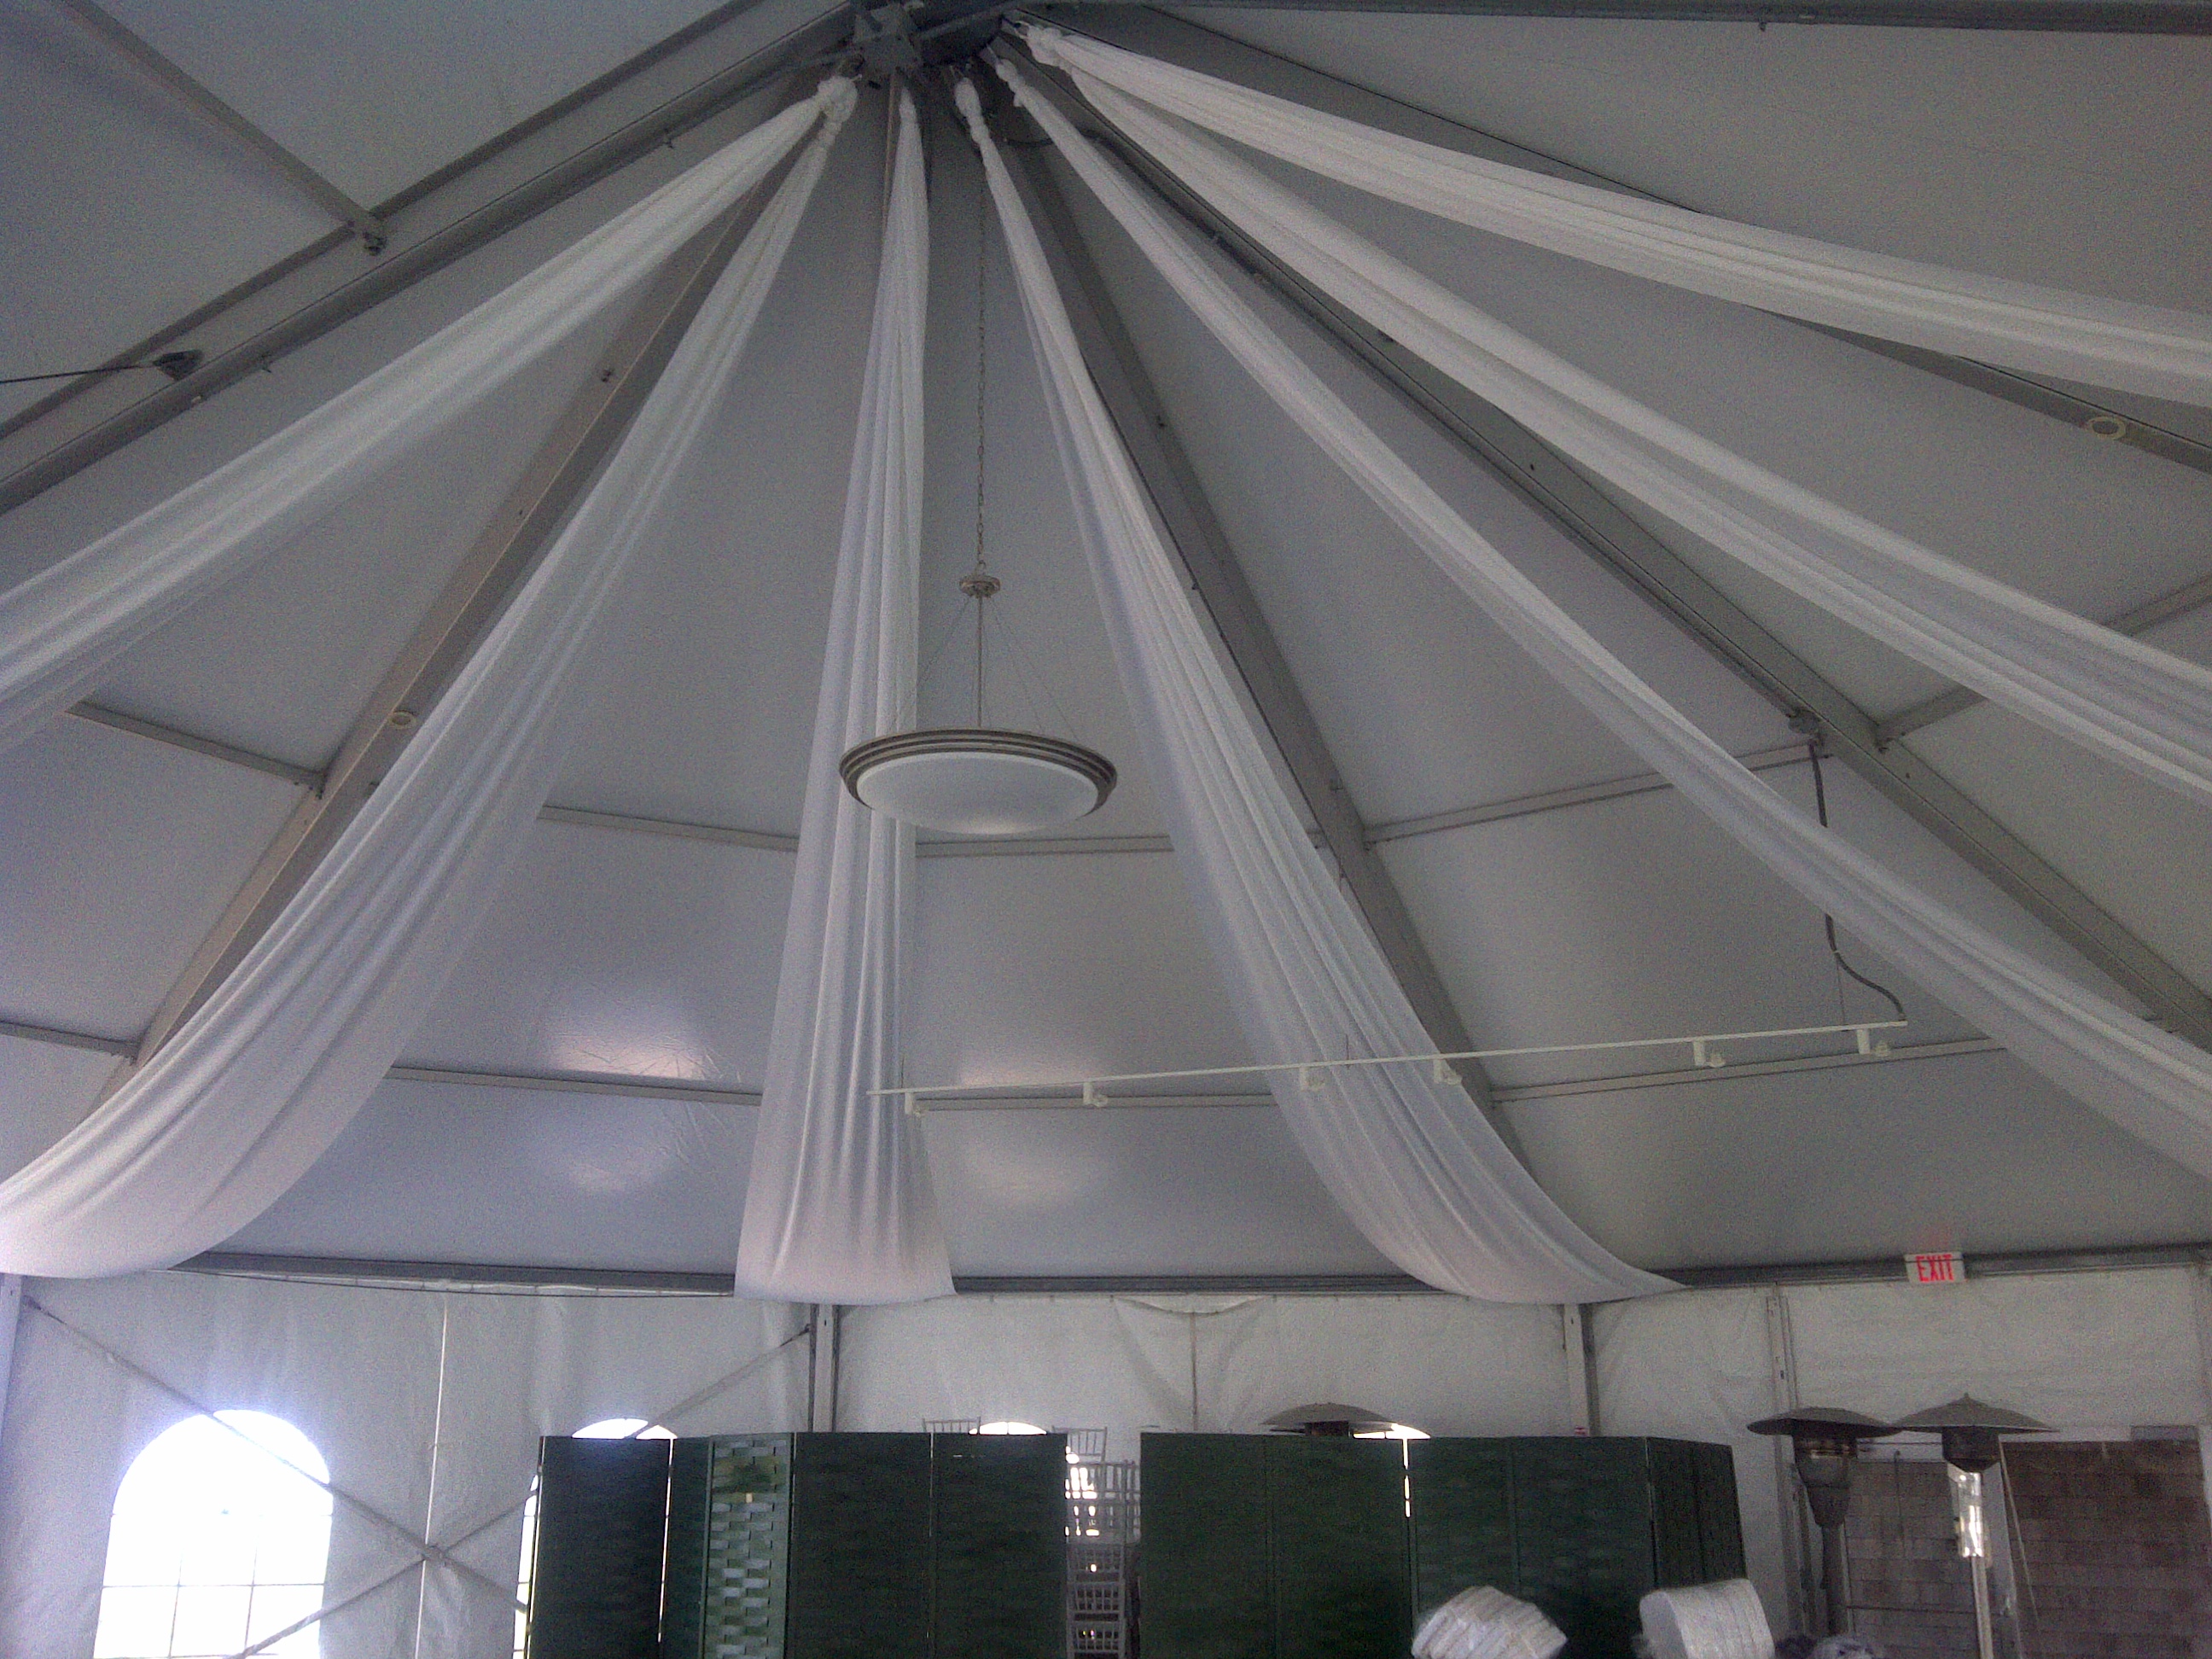 Fabric Swags in a Frame Tent